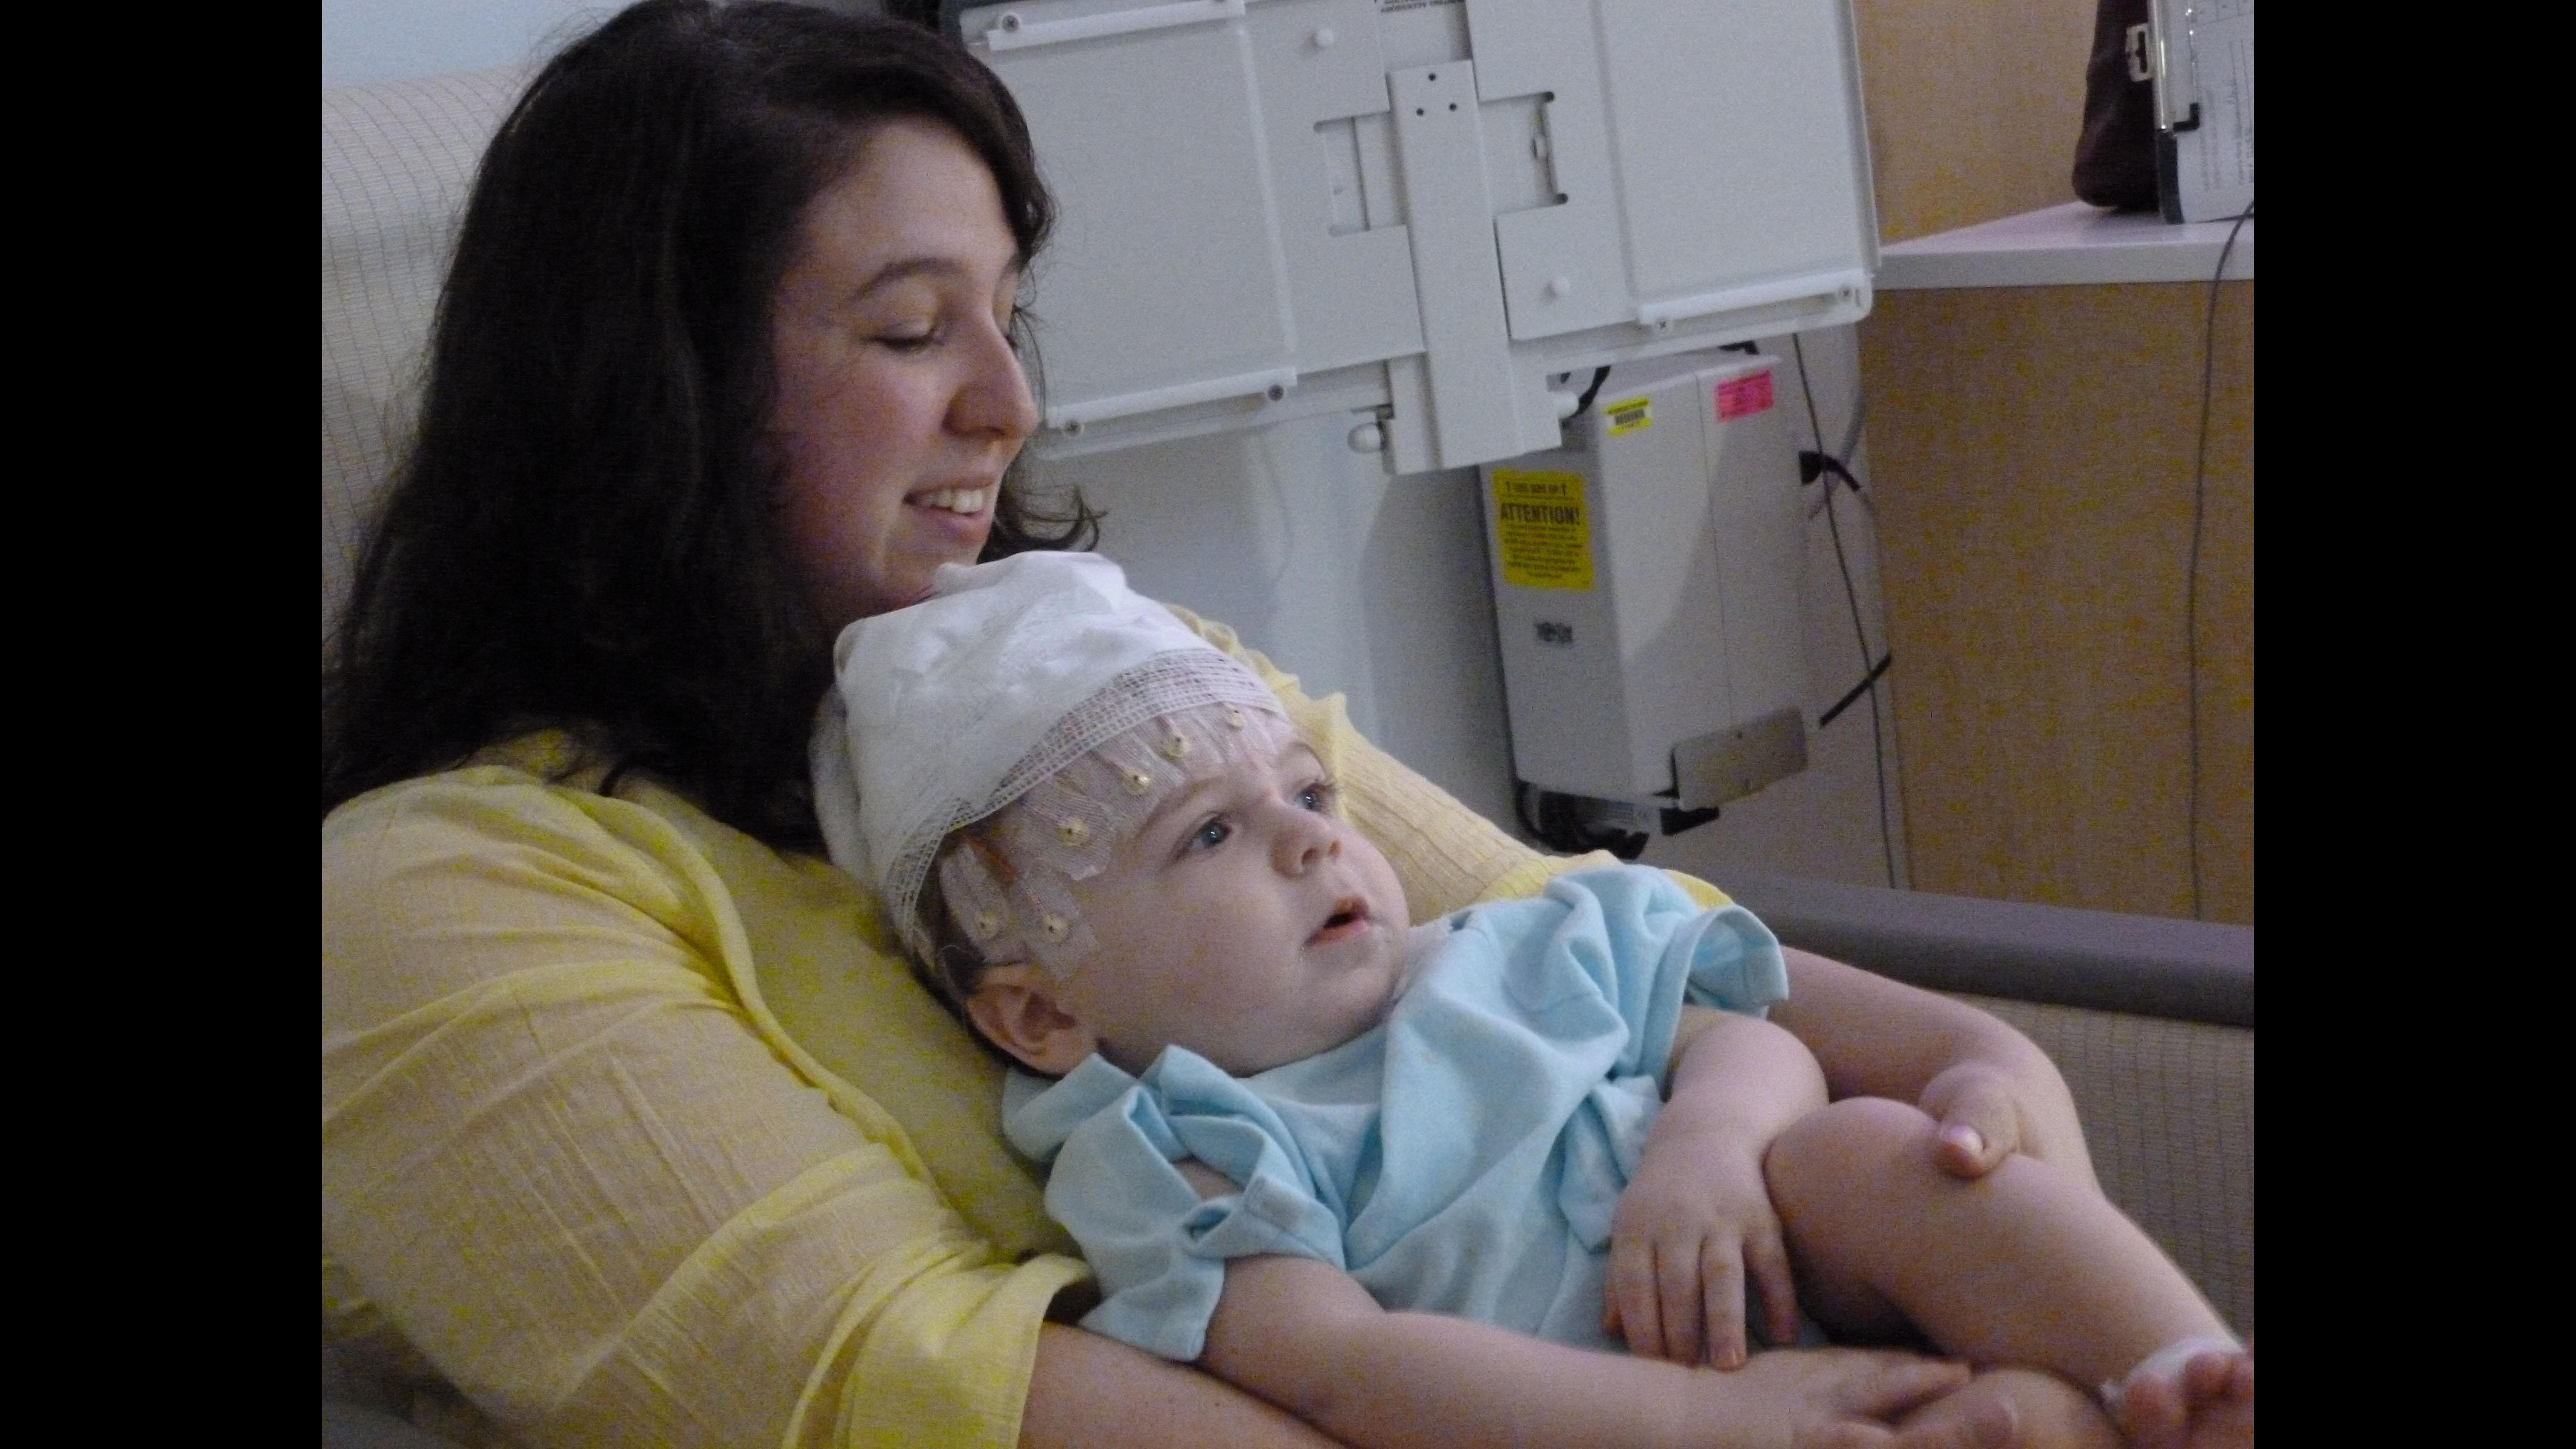 Ellen Wehrman and her son, Charlie, spend his first birthday preparing for an EEG. Wehrman, a former Loyola University Chicago student activities coordinator, will receive an award this week for raising awareness of infantile spasms, a rare disorder. (Courtesy Ellen Wehrman)